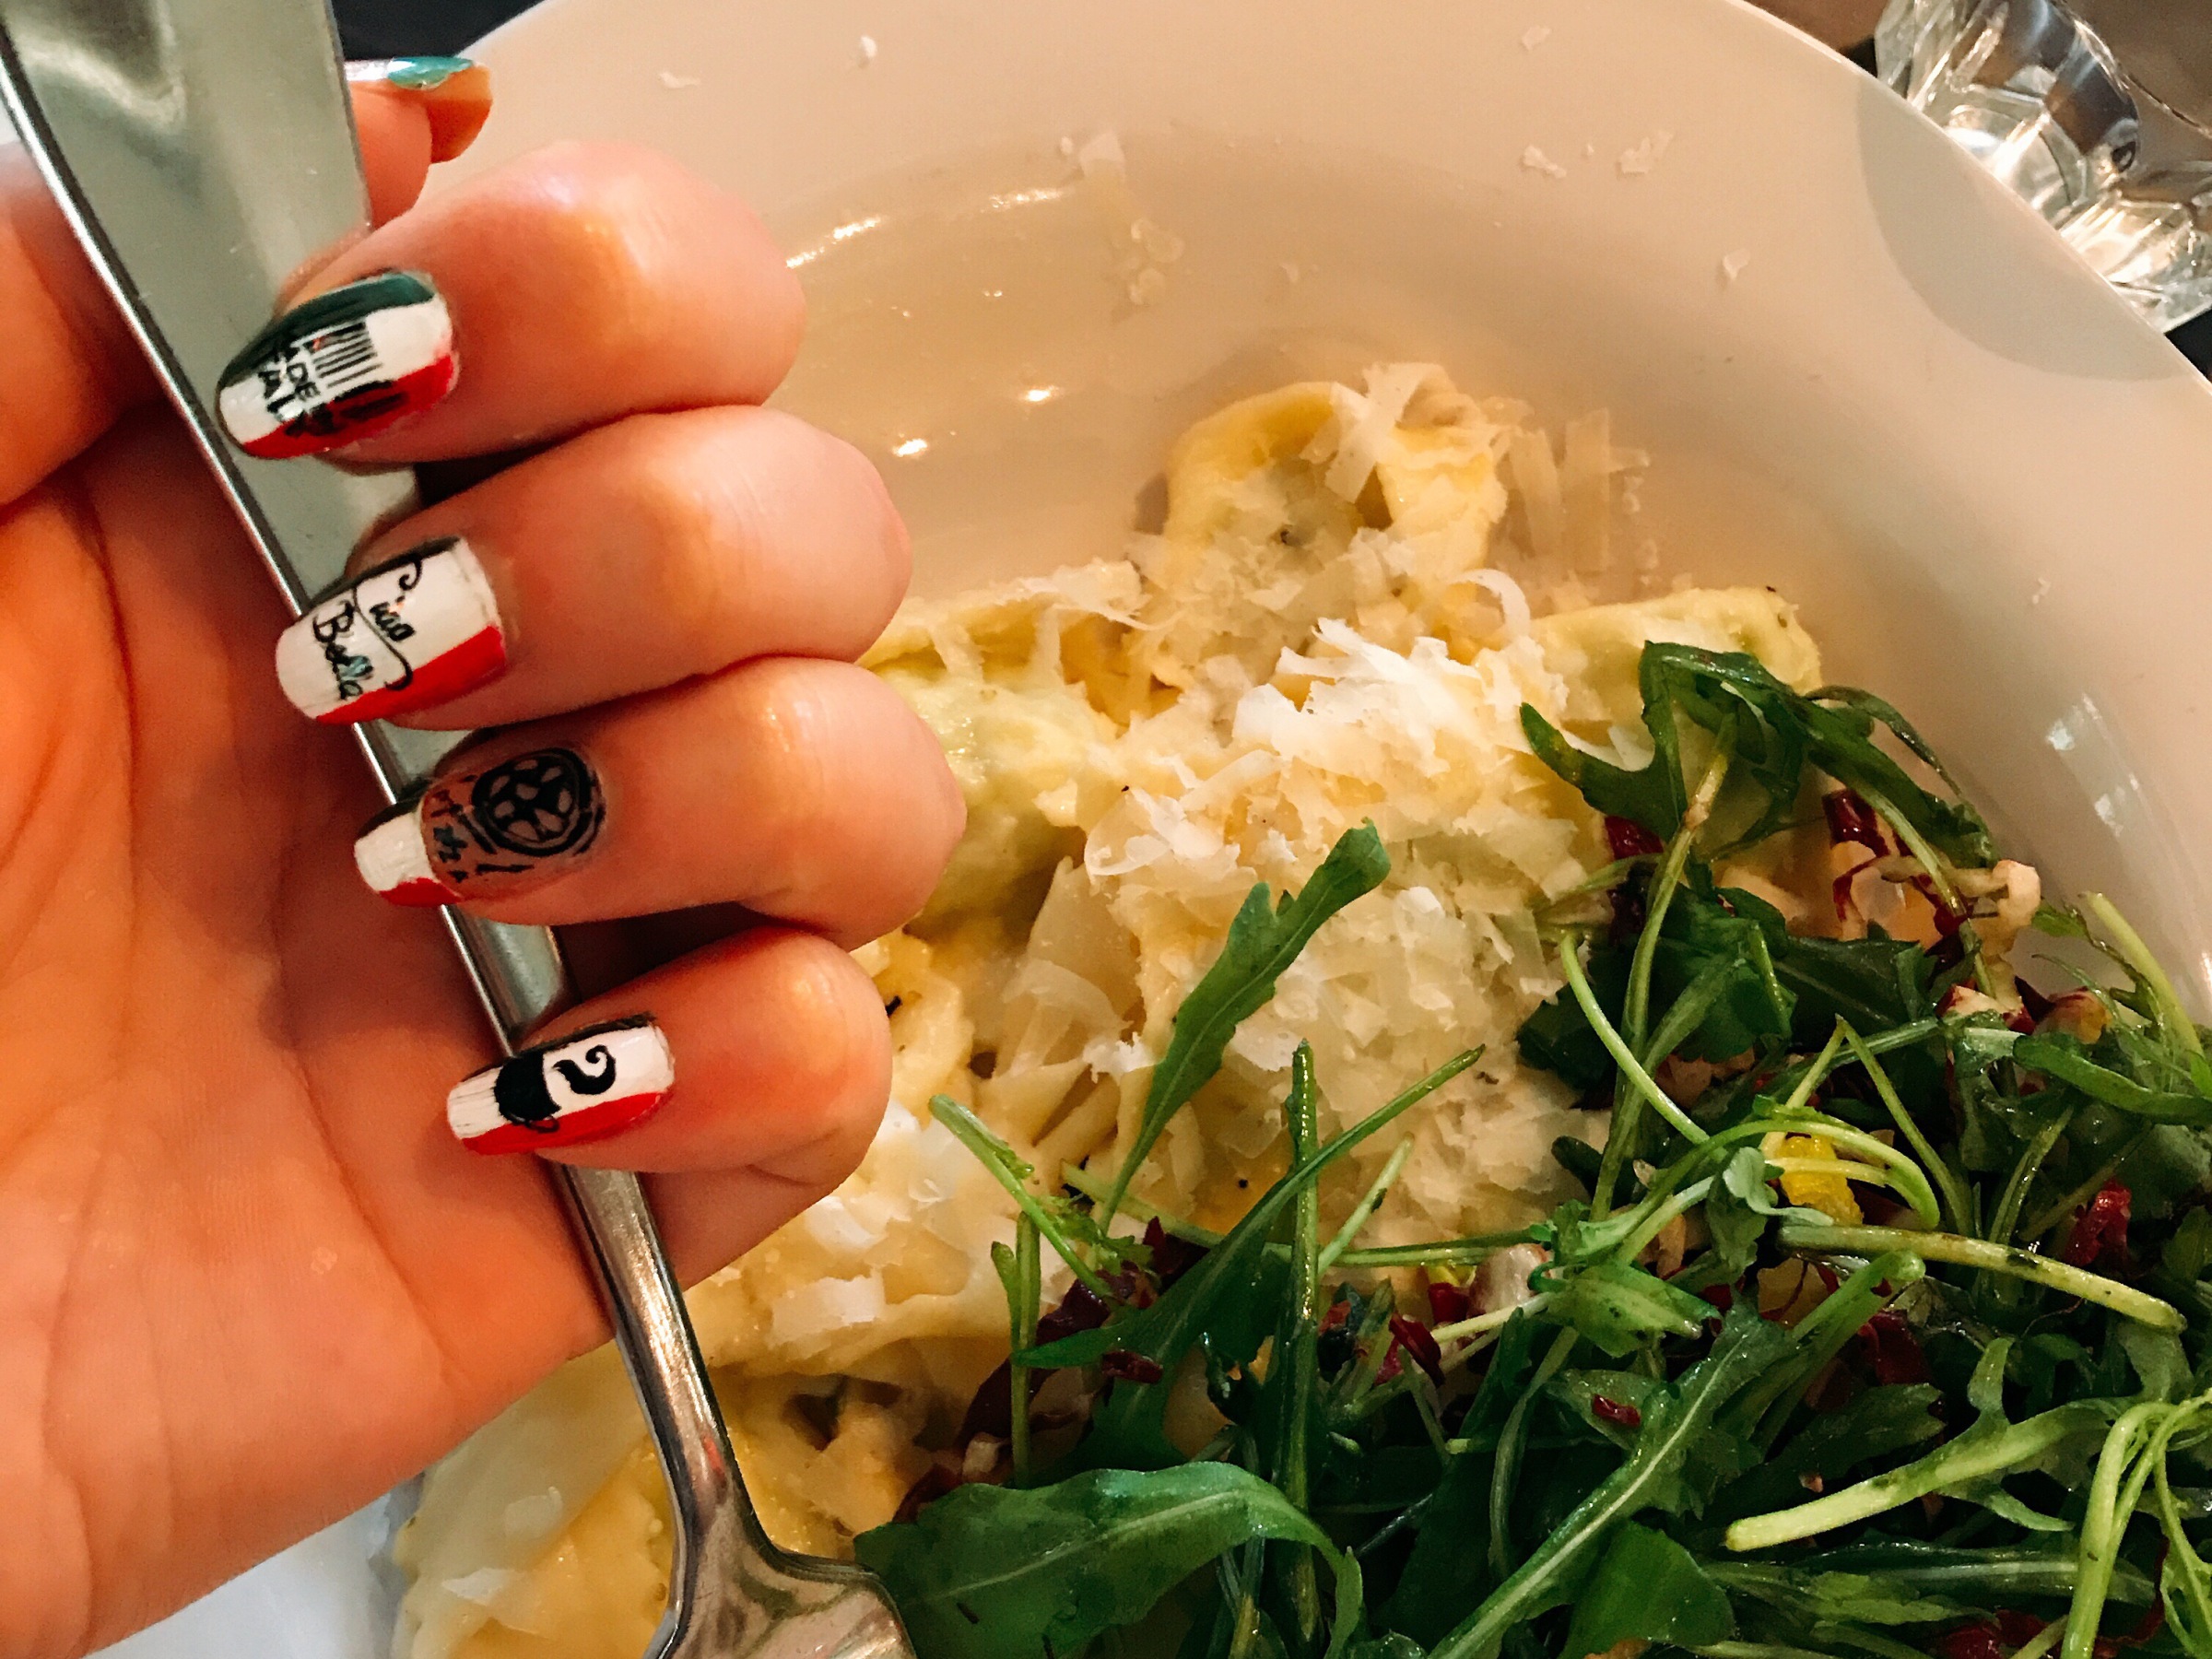 Filled Pasta with Italian-inspired nail art at Jamie Oliver's Cookery School